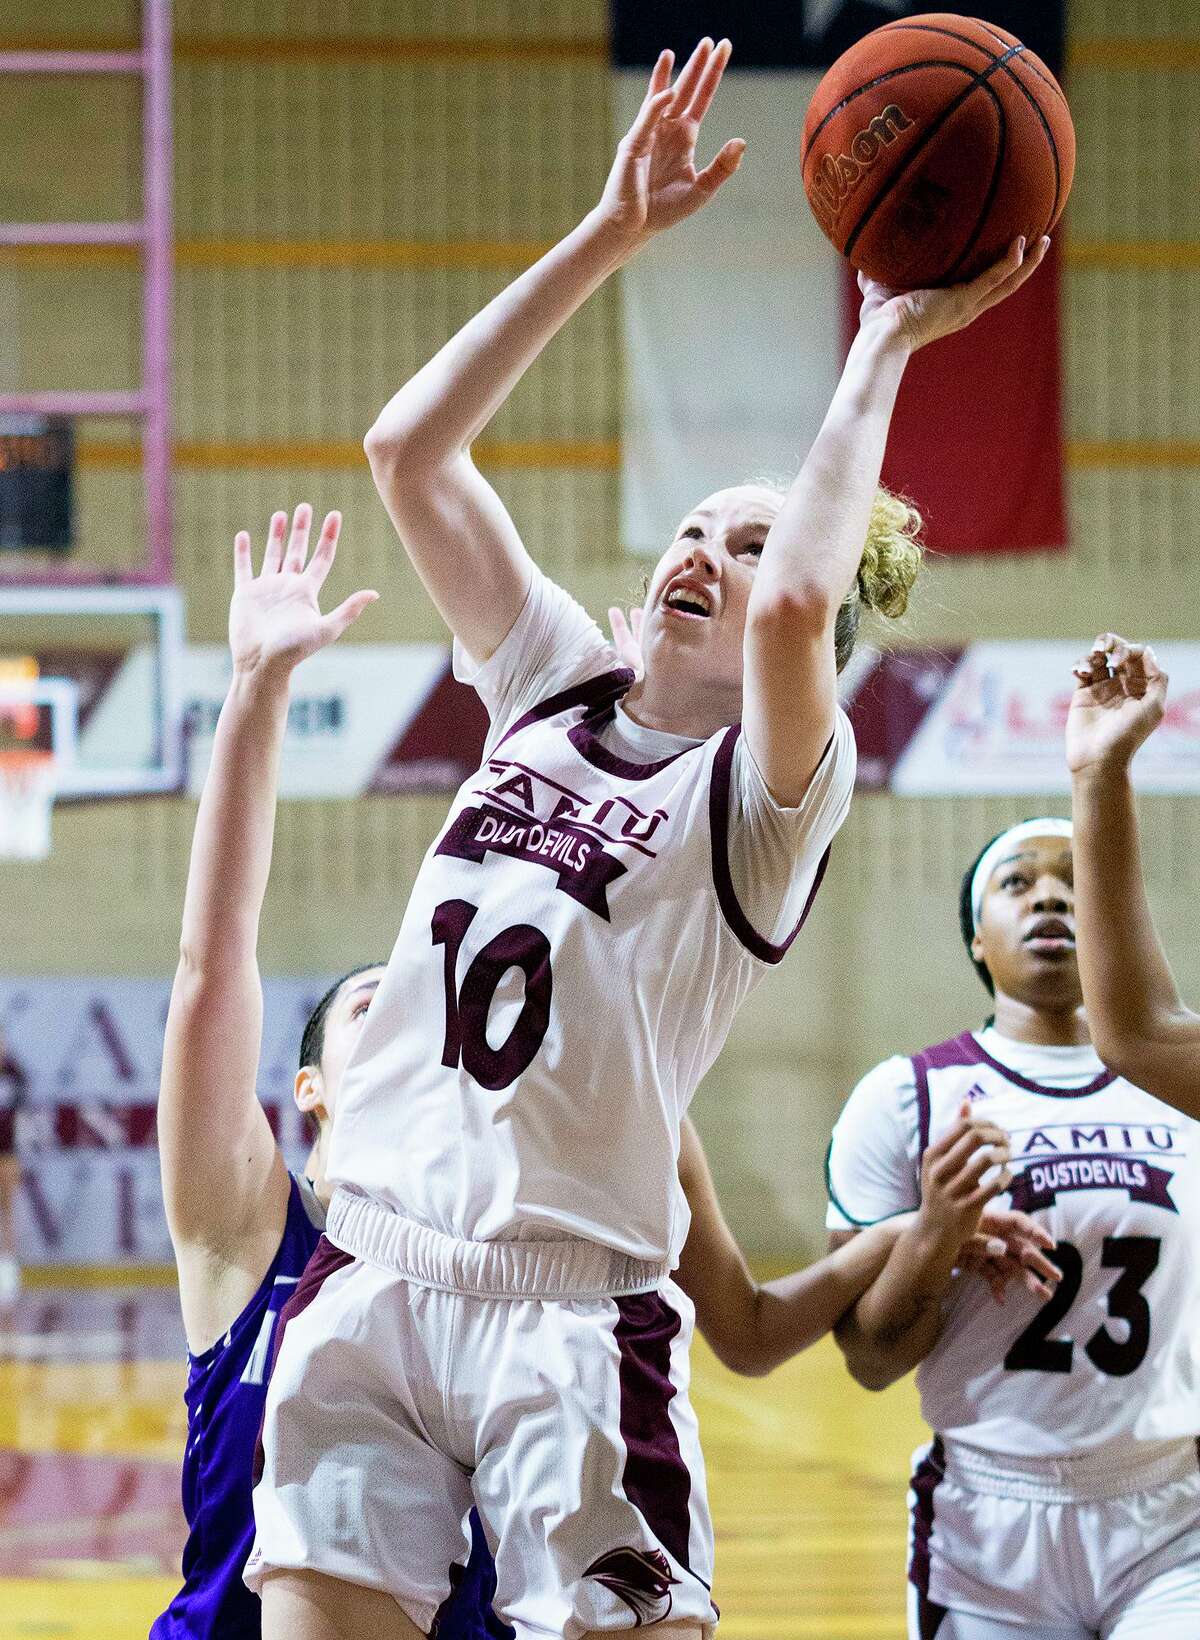 TAMIU’s Eva Langton takes a jump shot during a game against New Mexico Highlands.